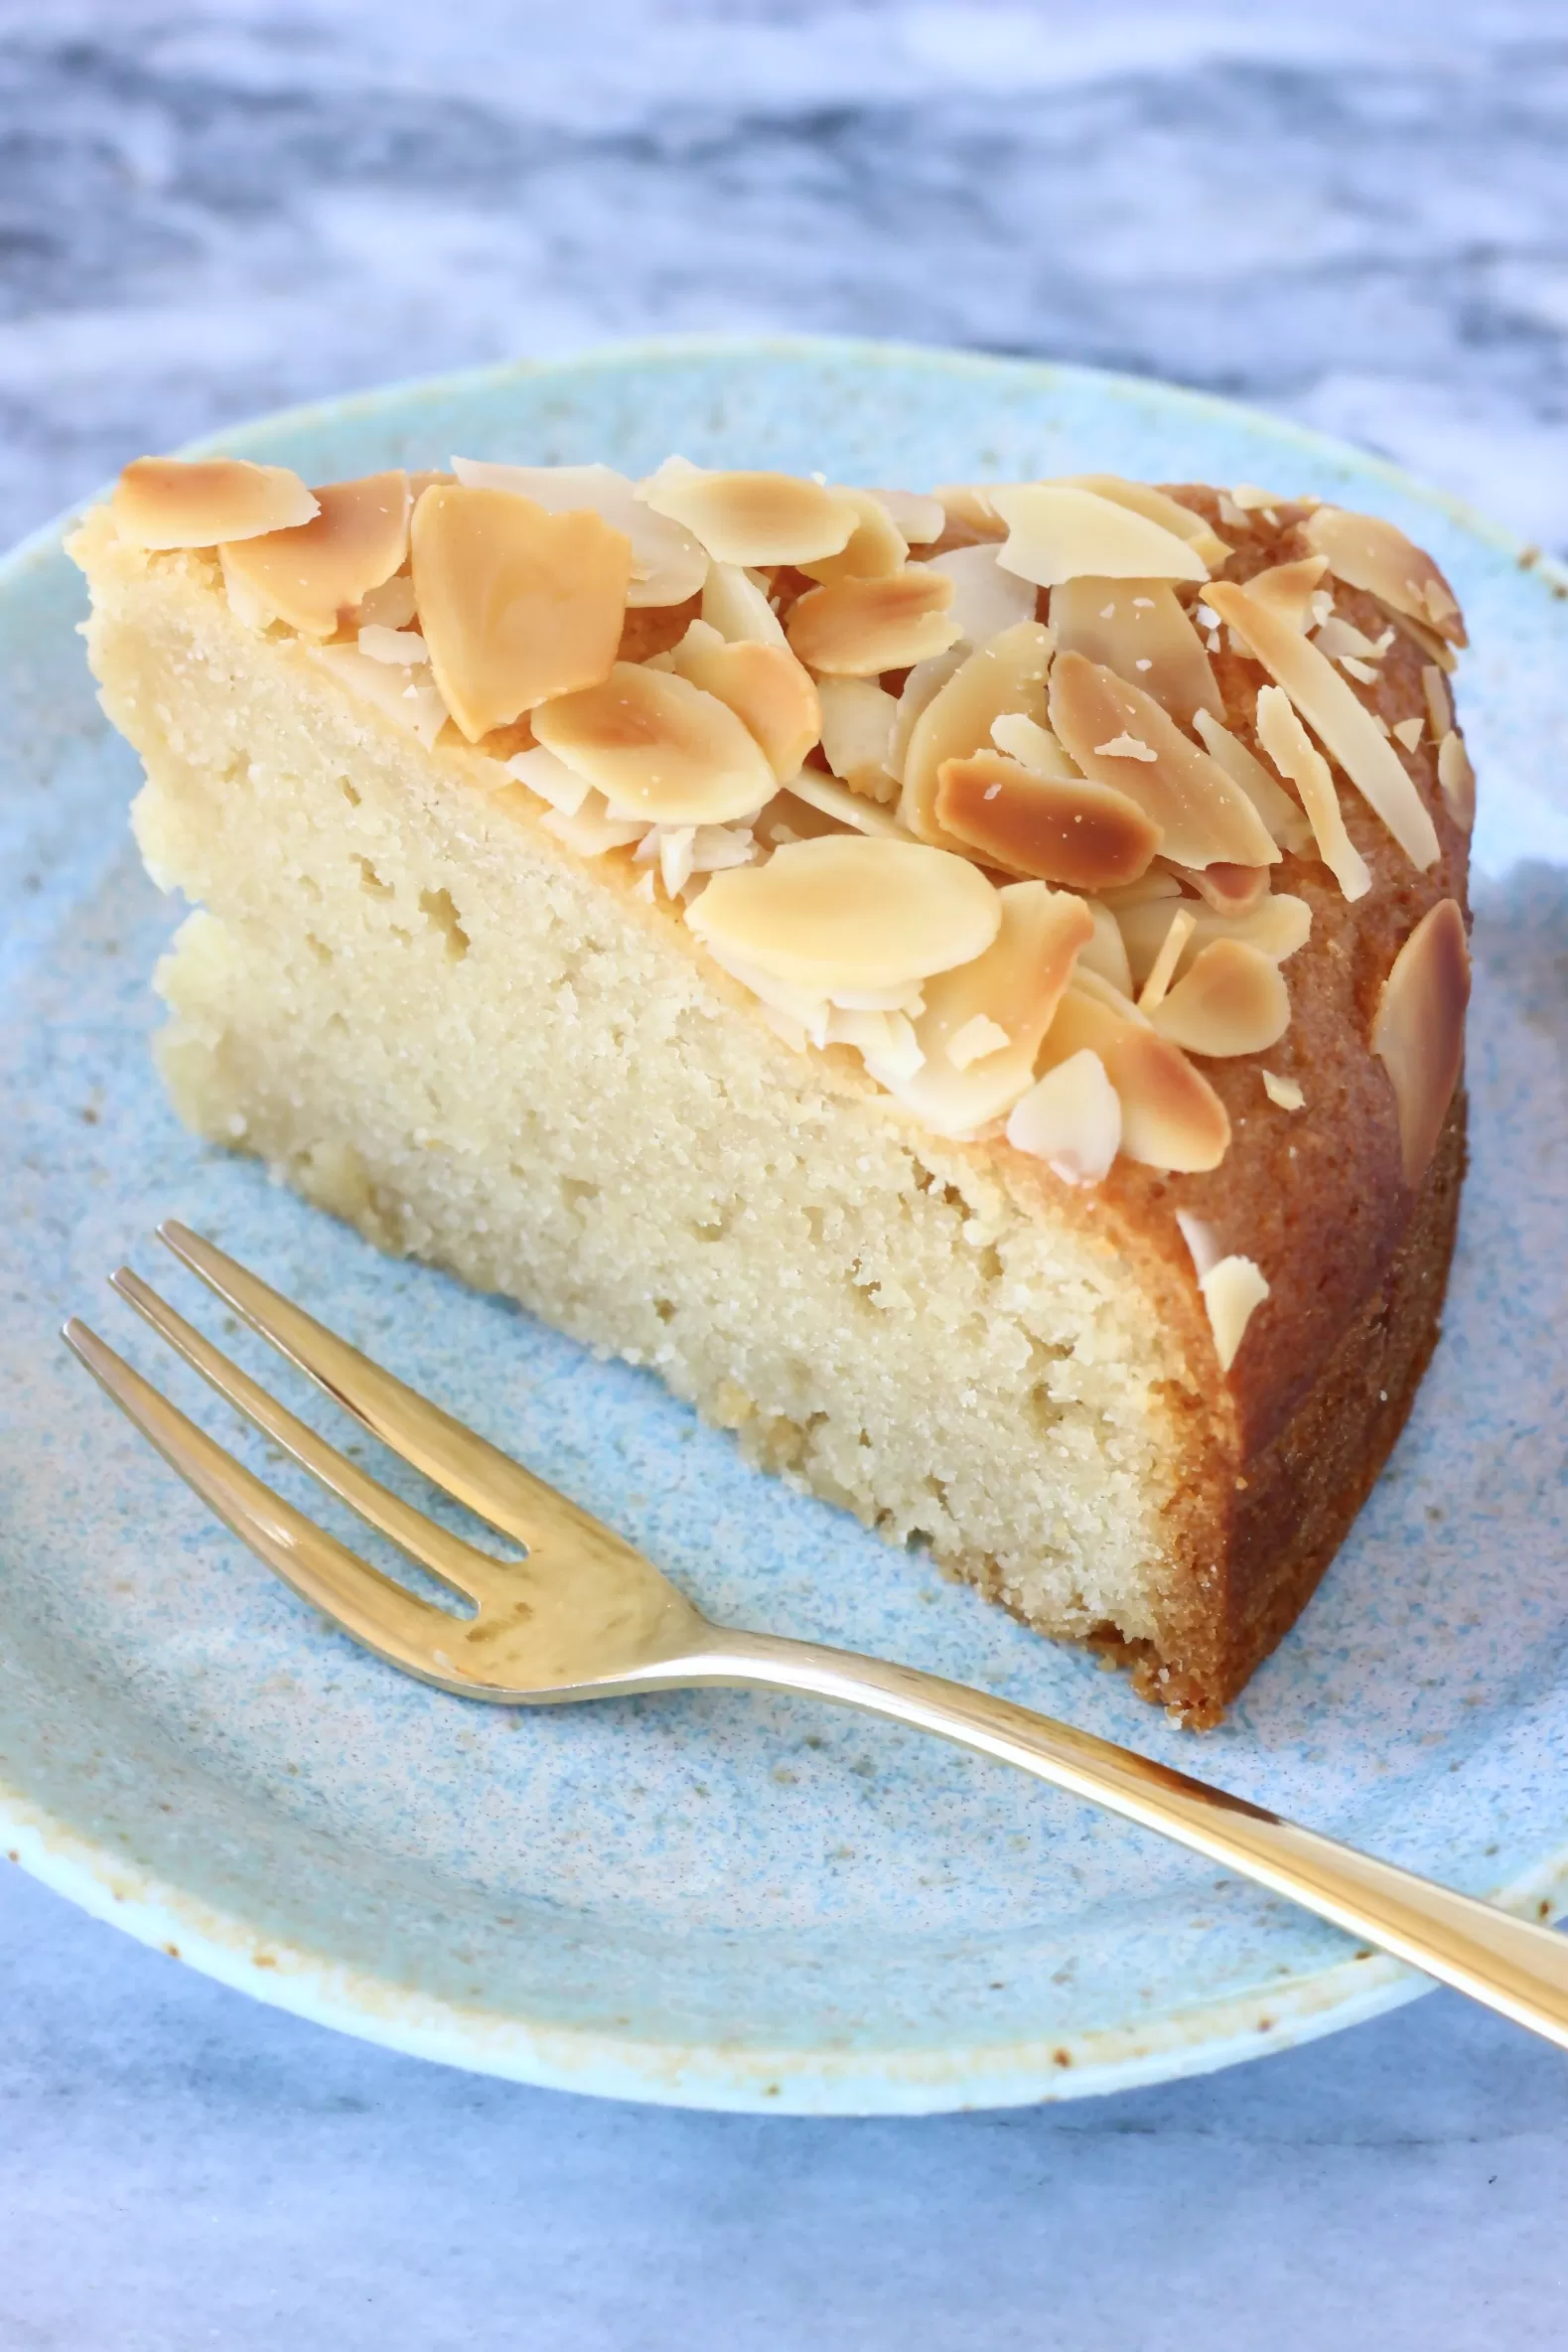 A slice of gluten-free vegan almond cake on a blue plate with a gold fork